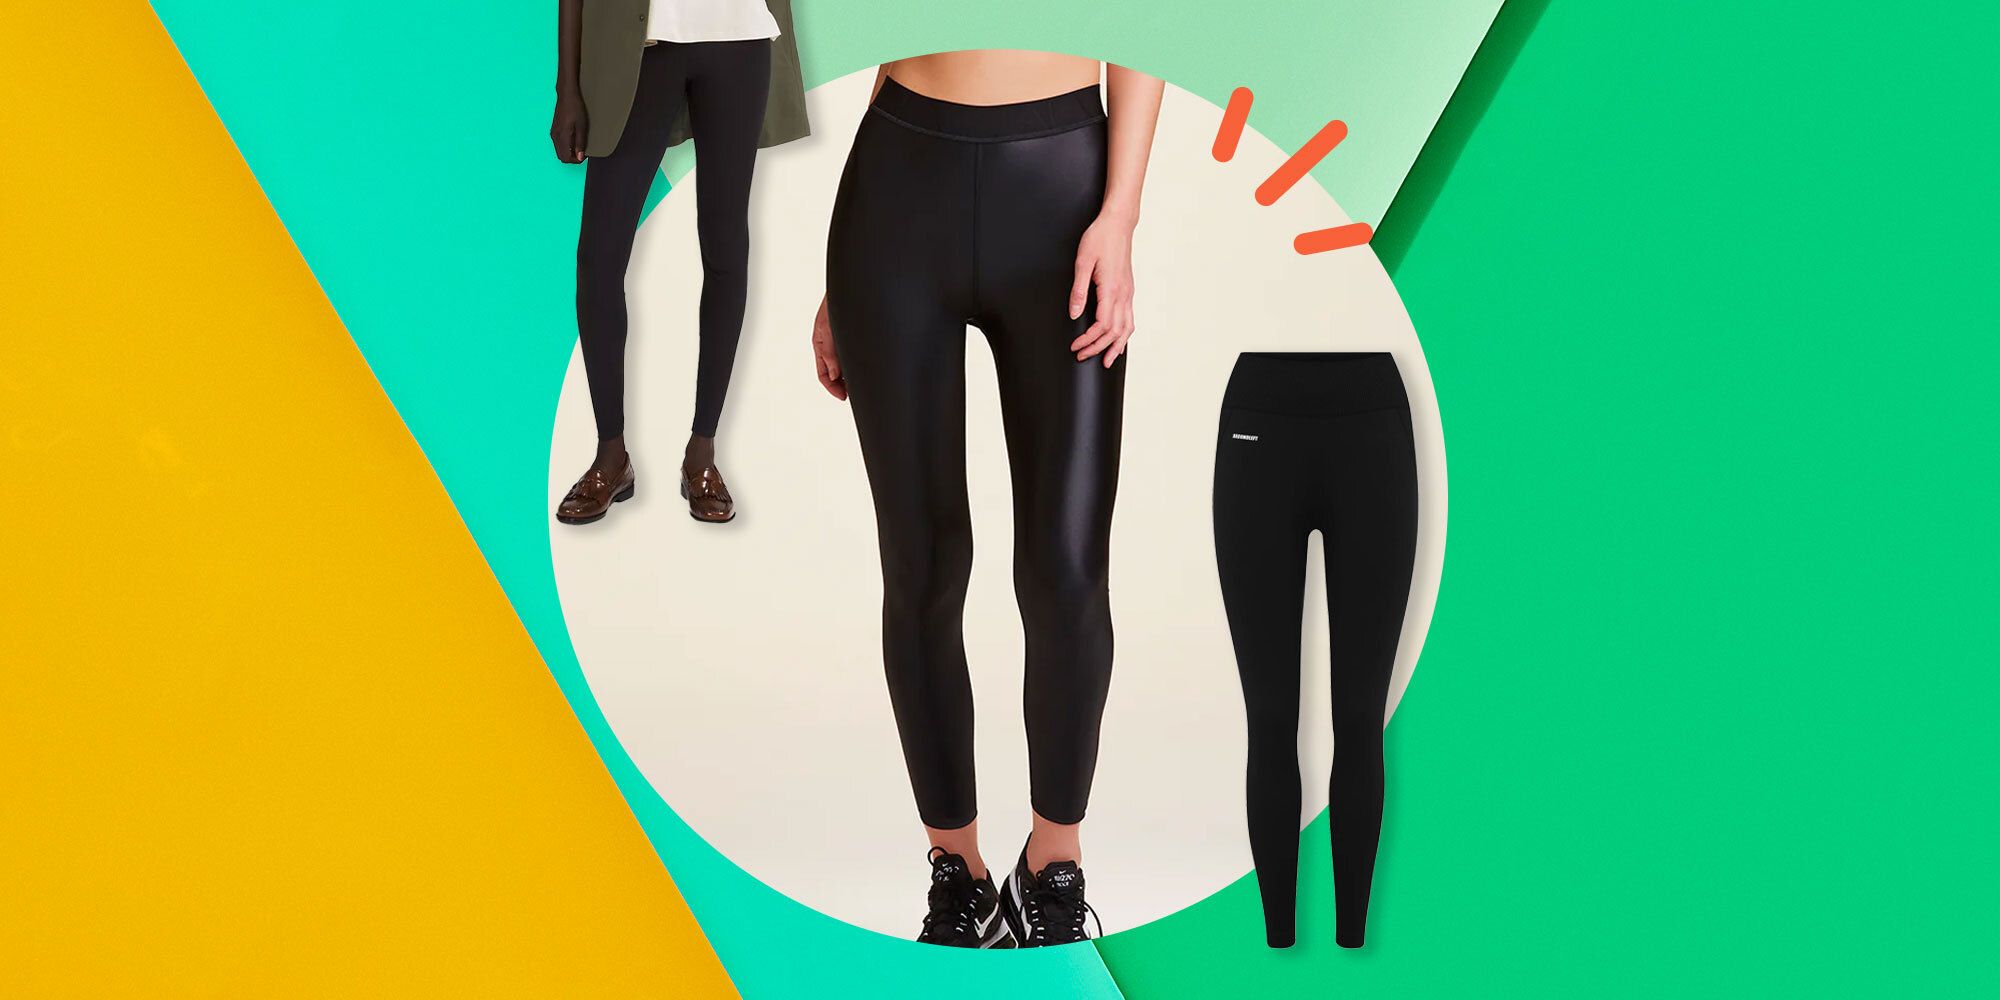 Buy Women's Microfiber Elastane Stretch Panel Printed Performance Leggings  with Coin Pocket and Stay Dry Technology - Wine Tasting MW21 | Jockey India